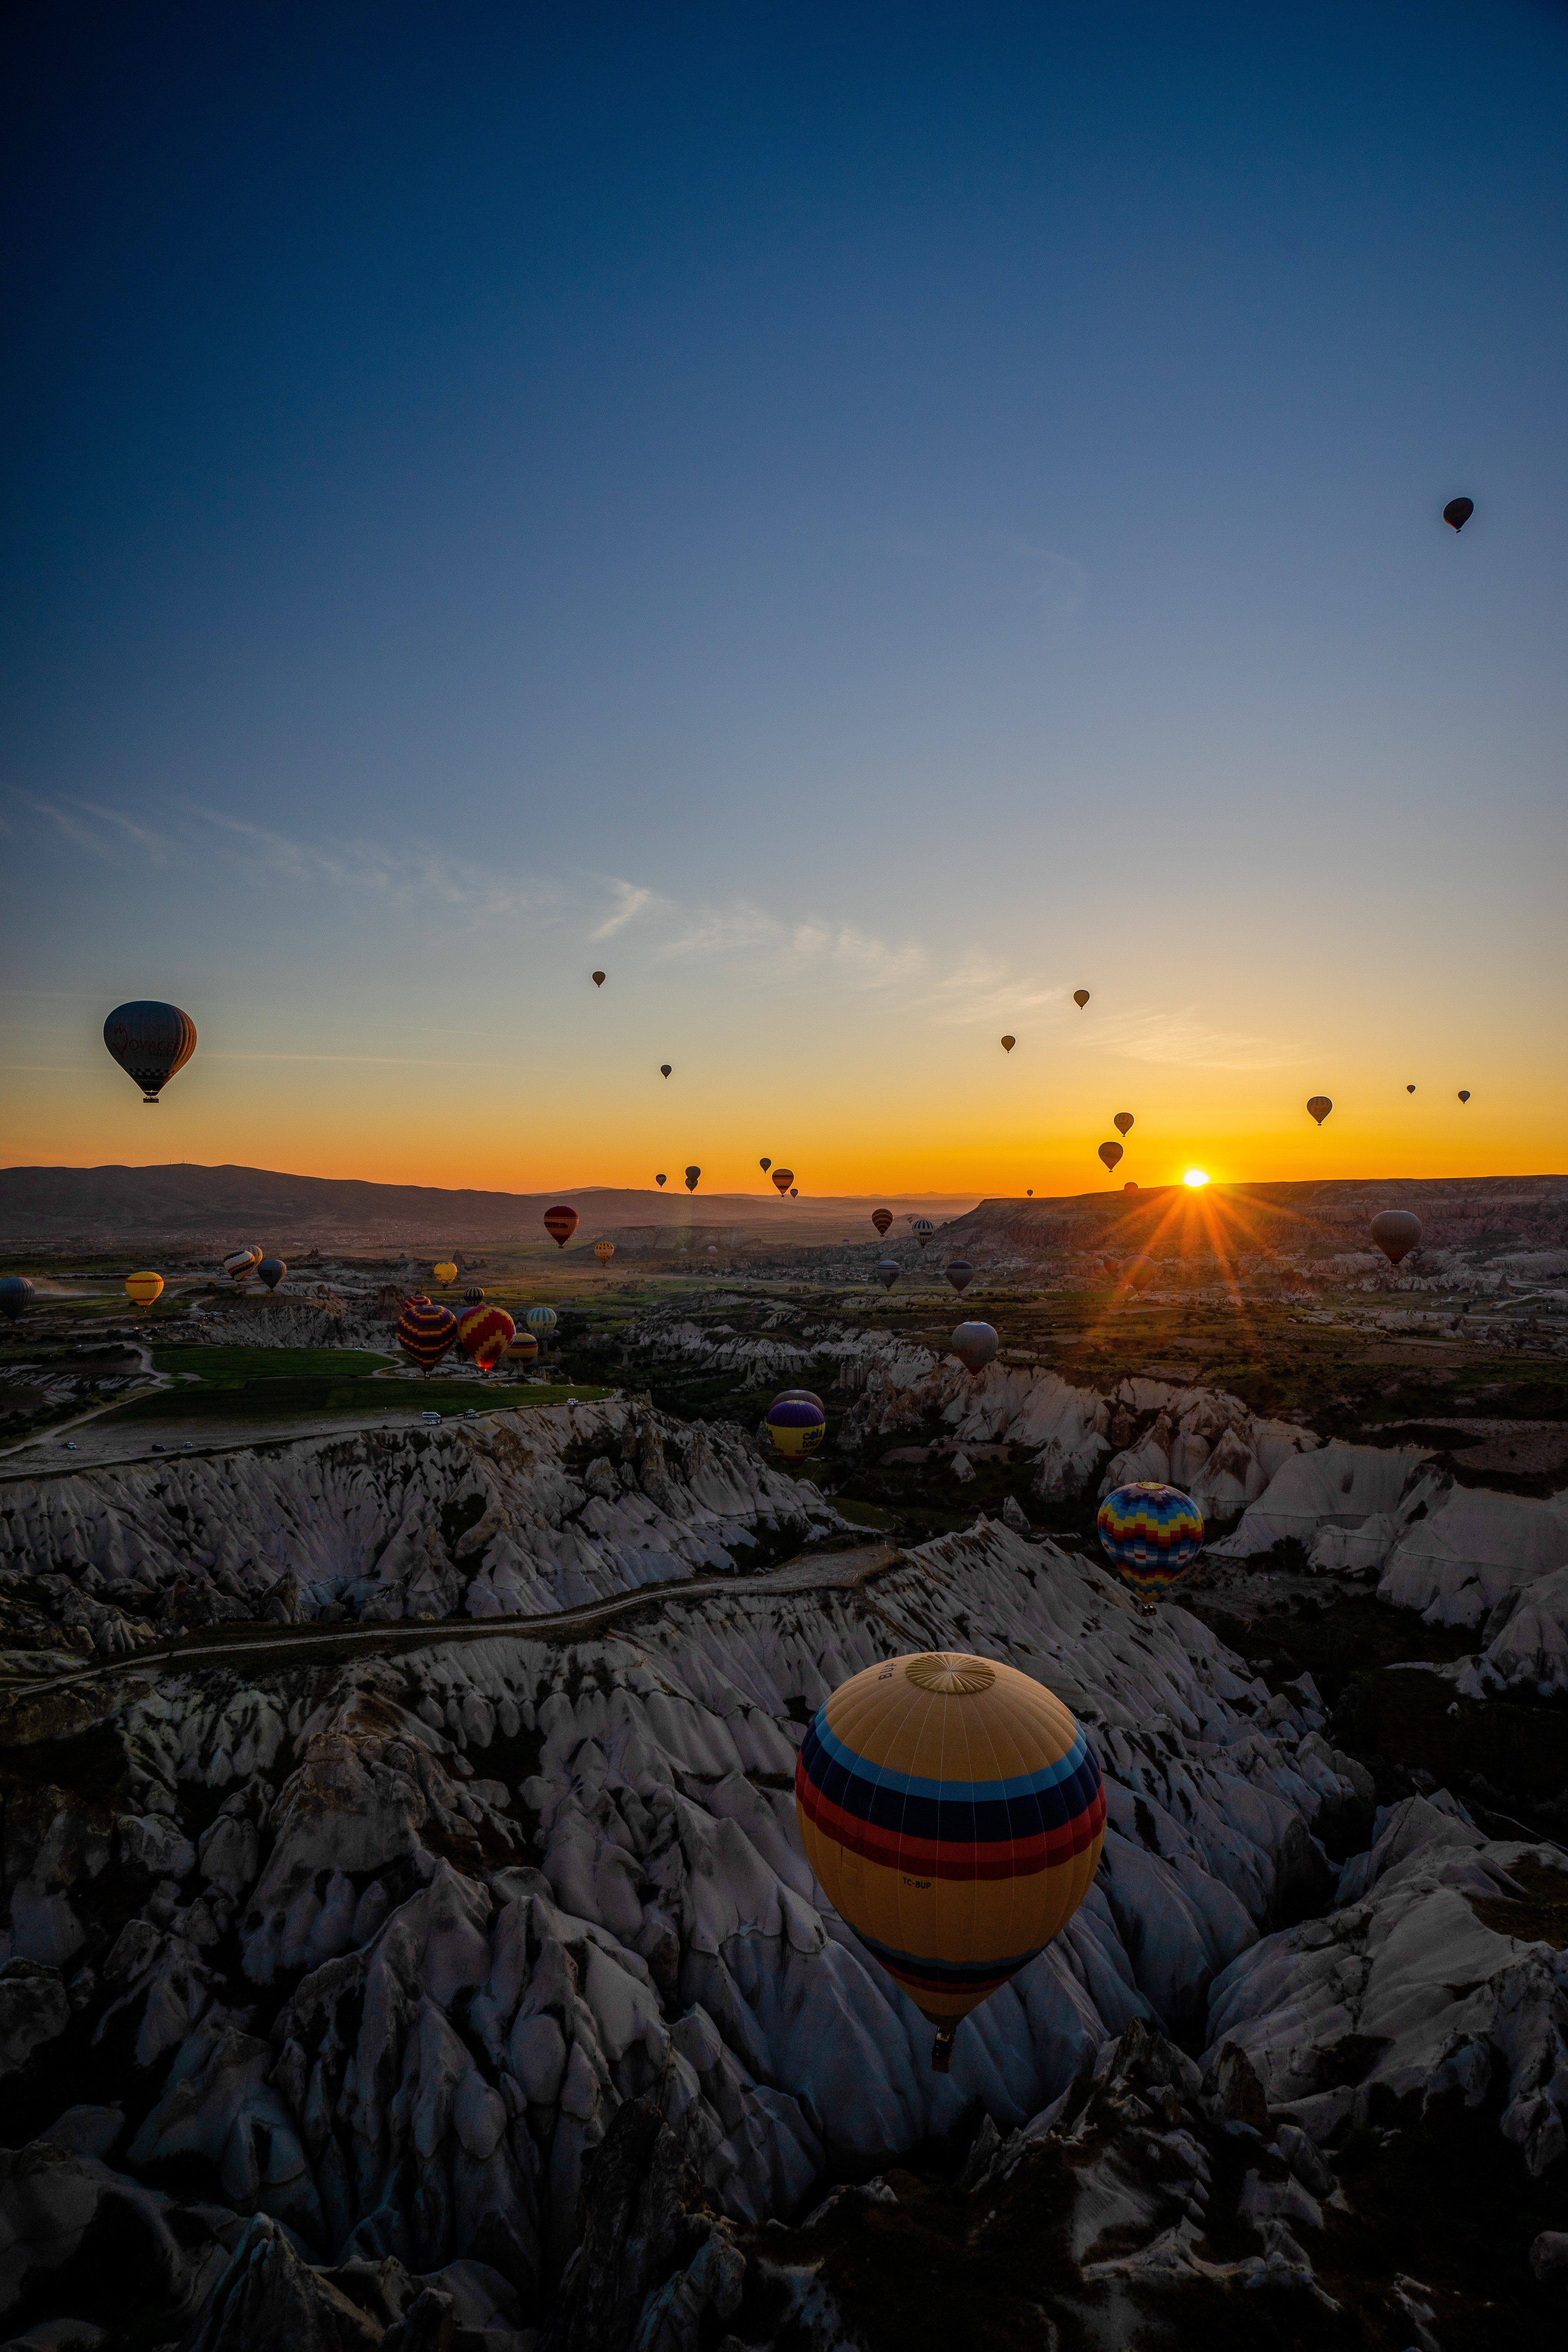 balloons, landscape, nature, mountains, dawn, view from above